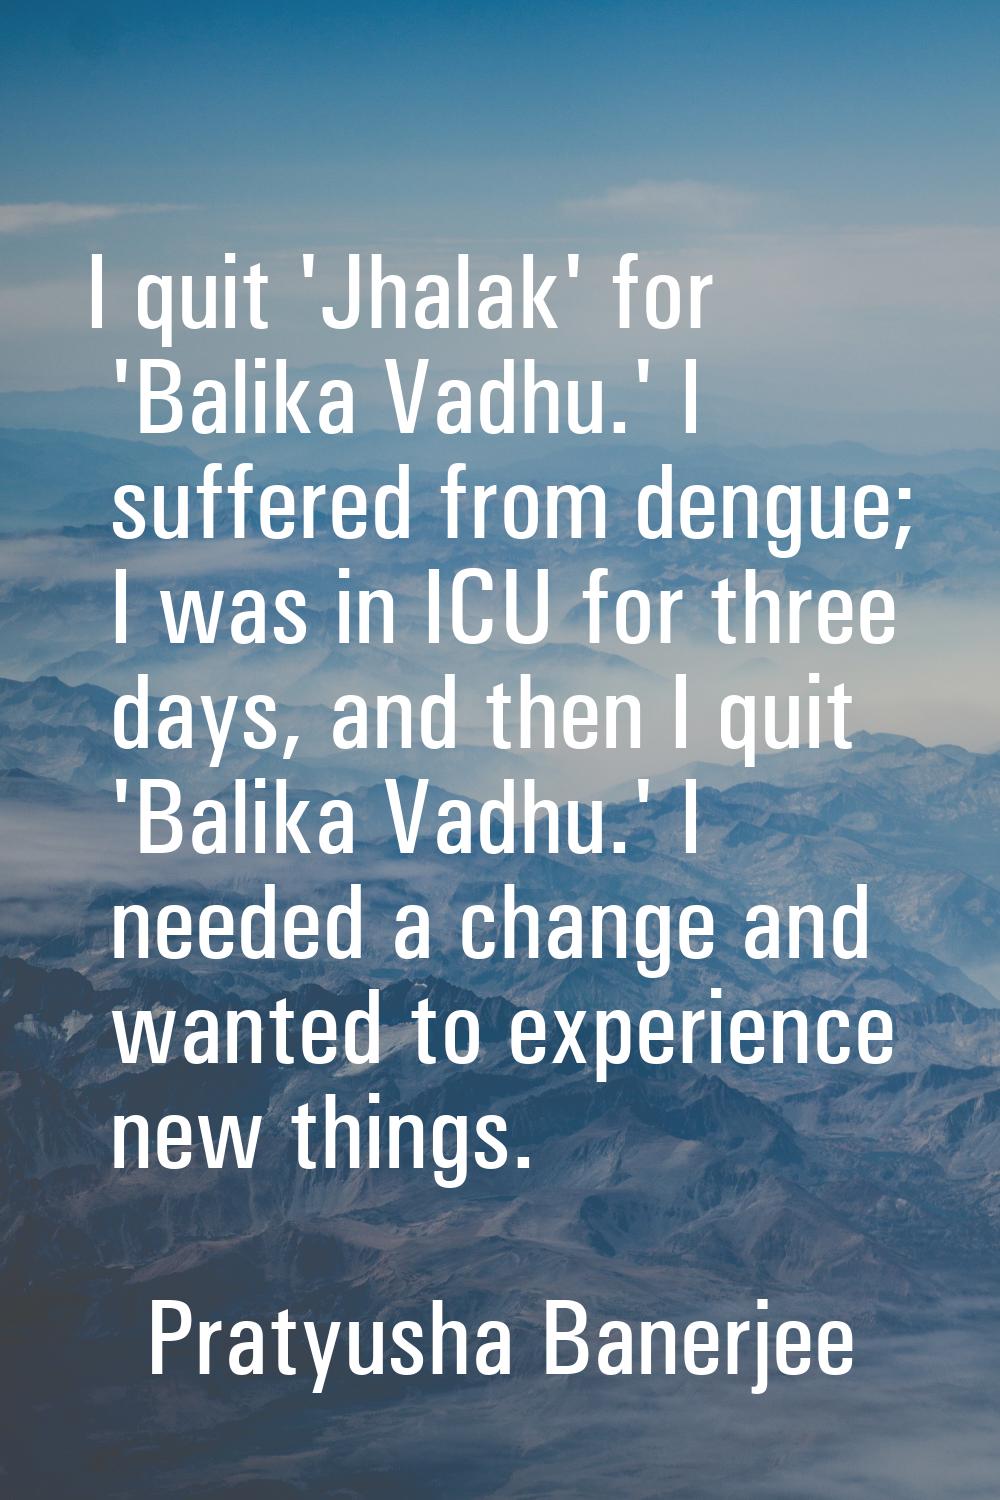 I quit 'Jhalak' for 'Balika Vadhu.' I suffered from dengue; I was in ICU for three days, and then I